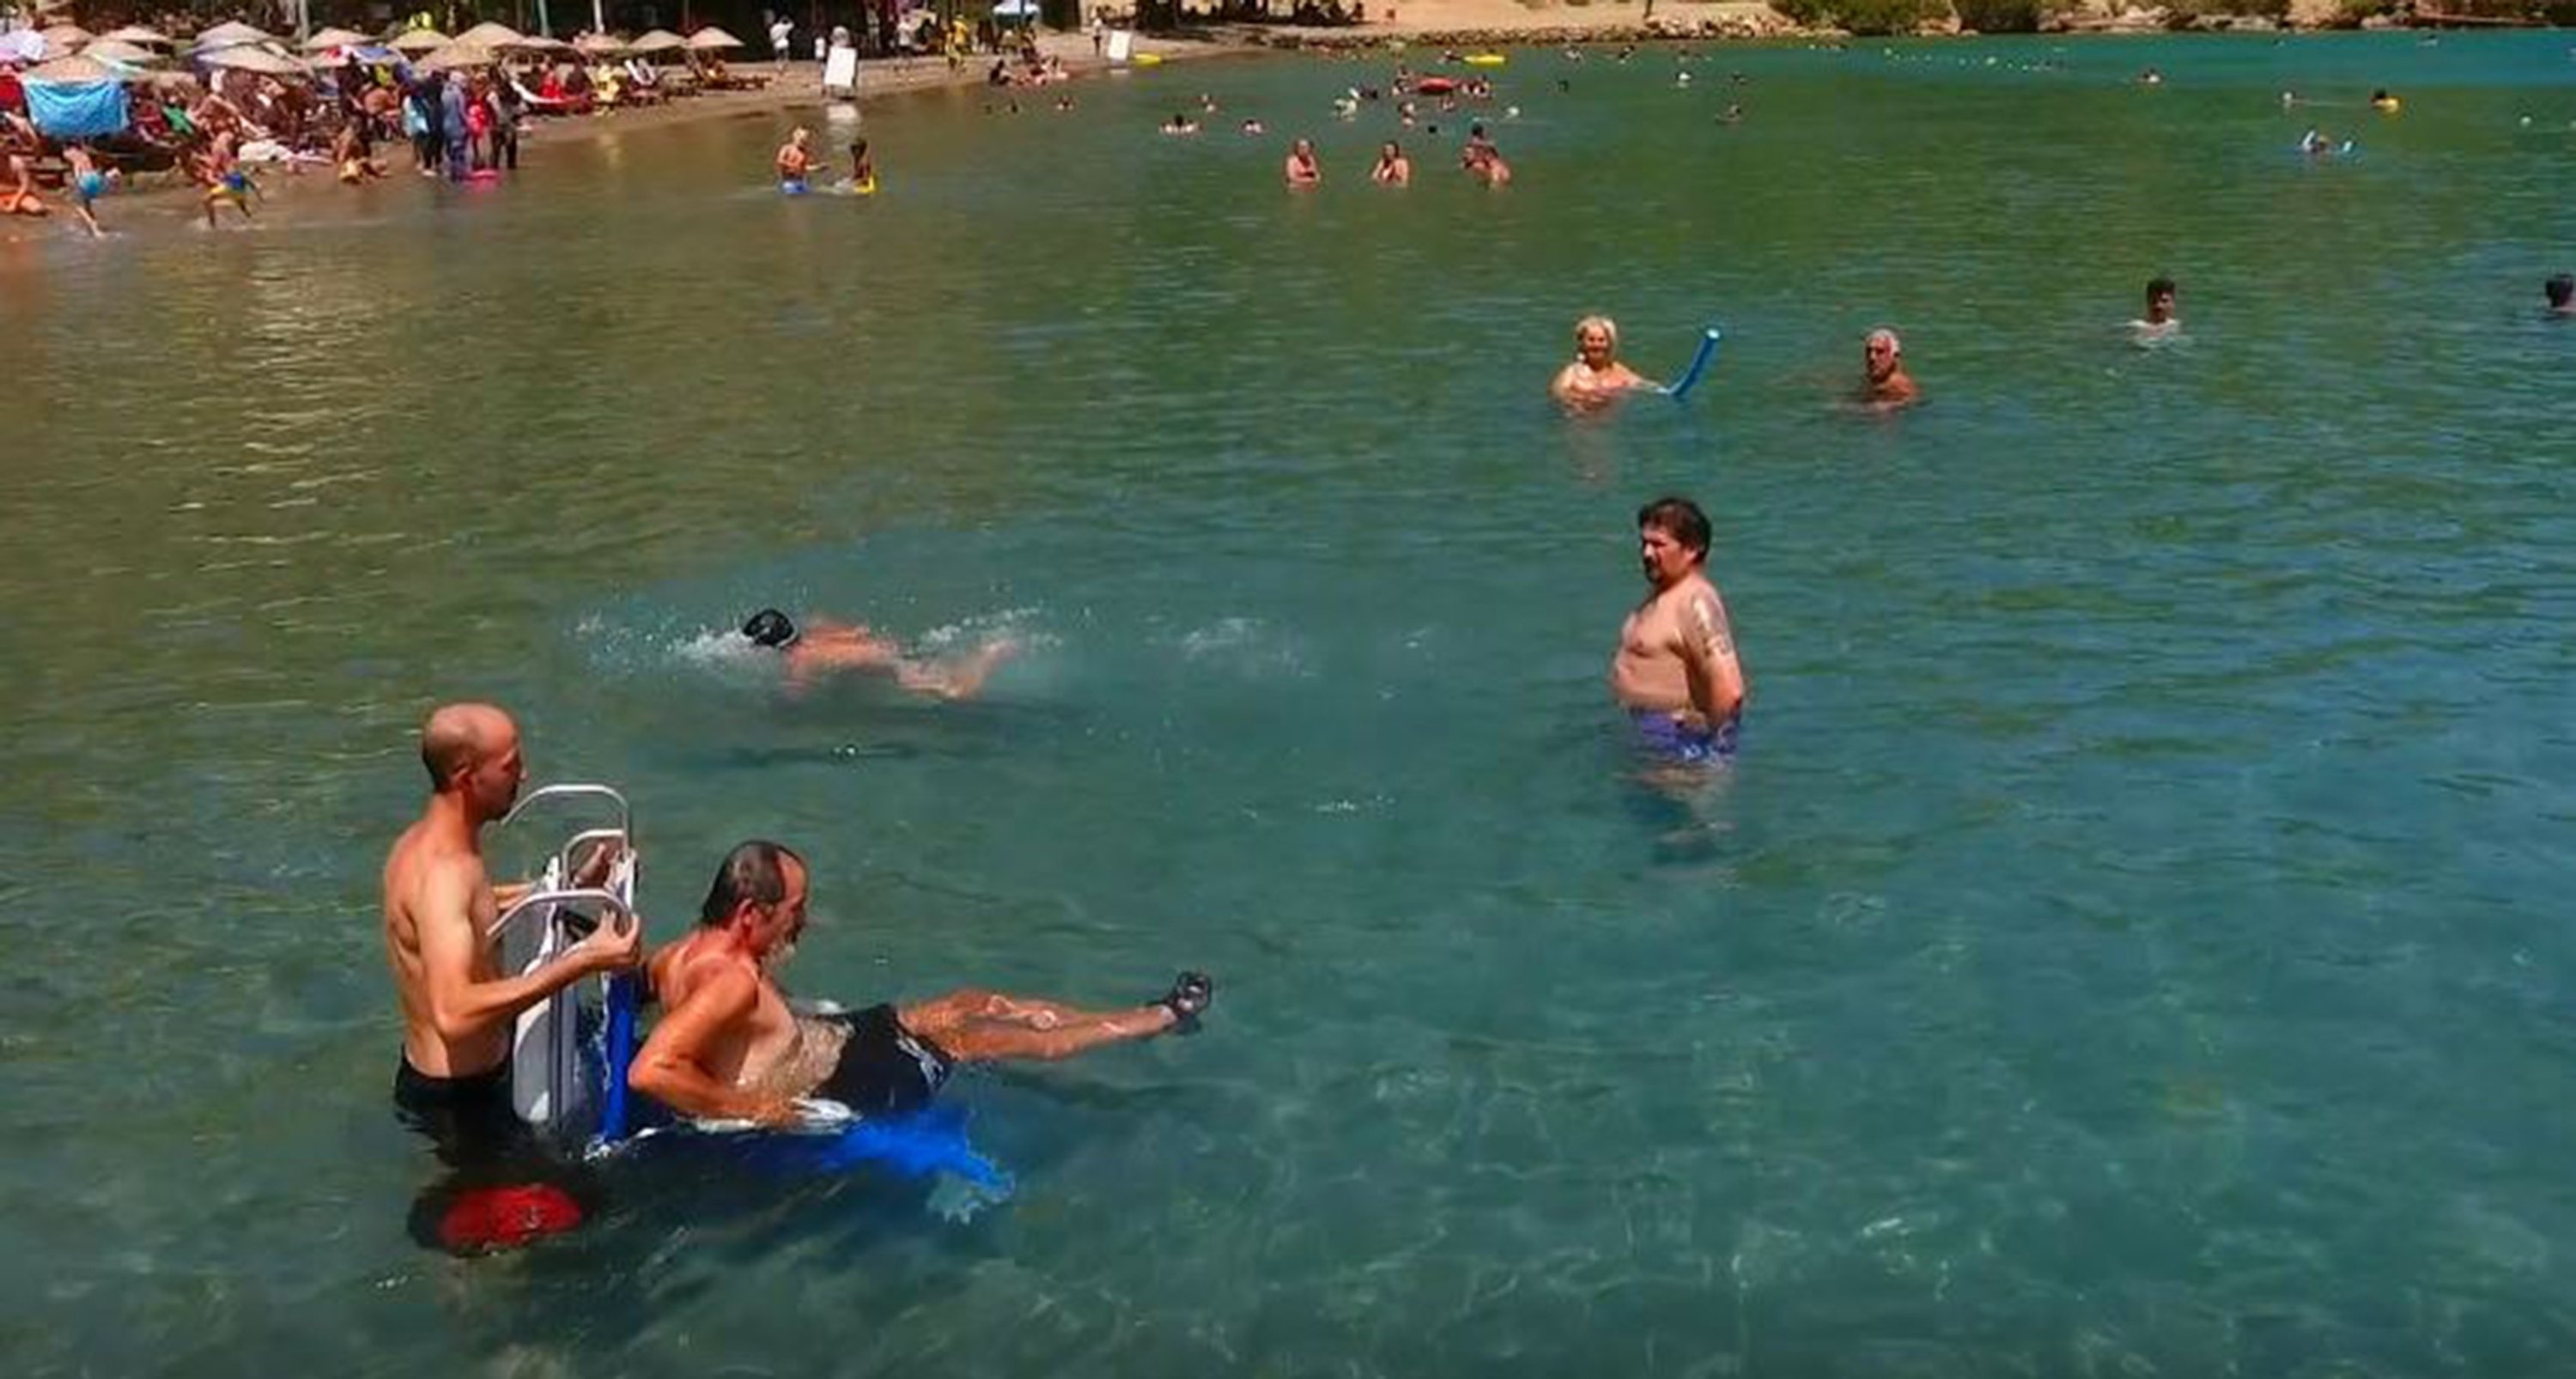 In 2016, Muğla’s Metropolitan Municipality launched a project that helps disabled citizens enjoy the sea. (IHA Photo)